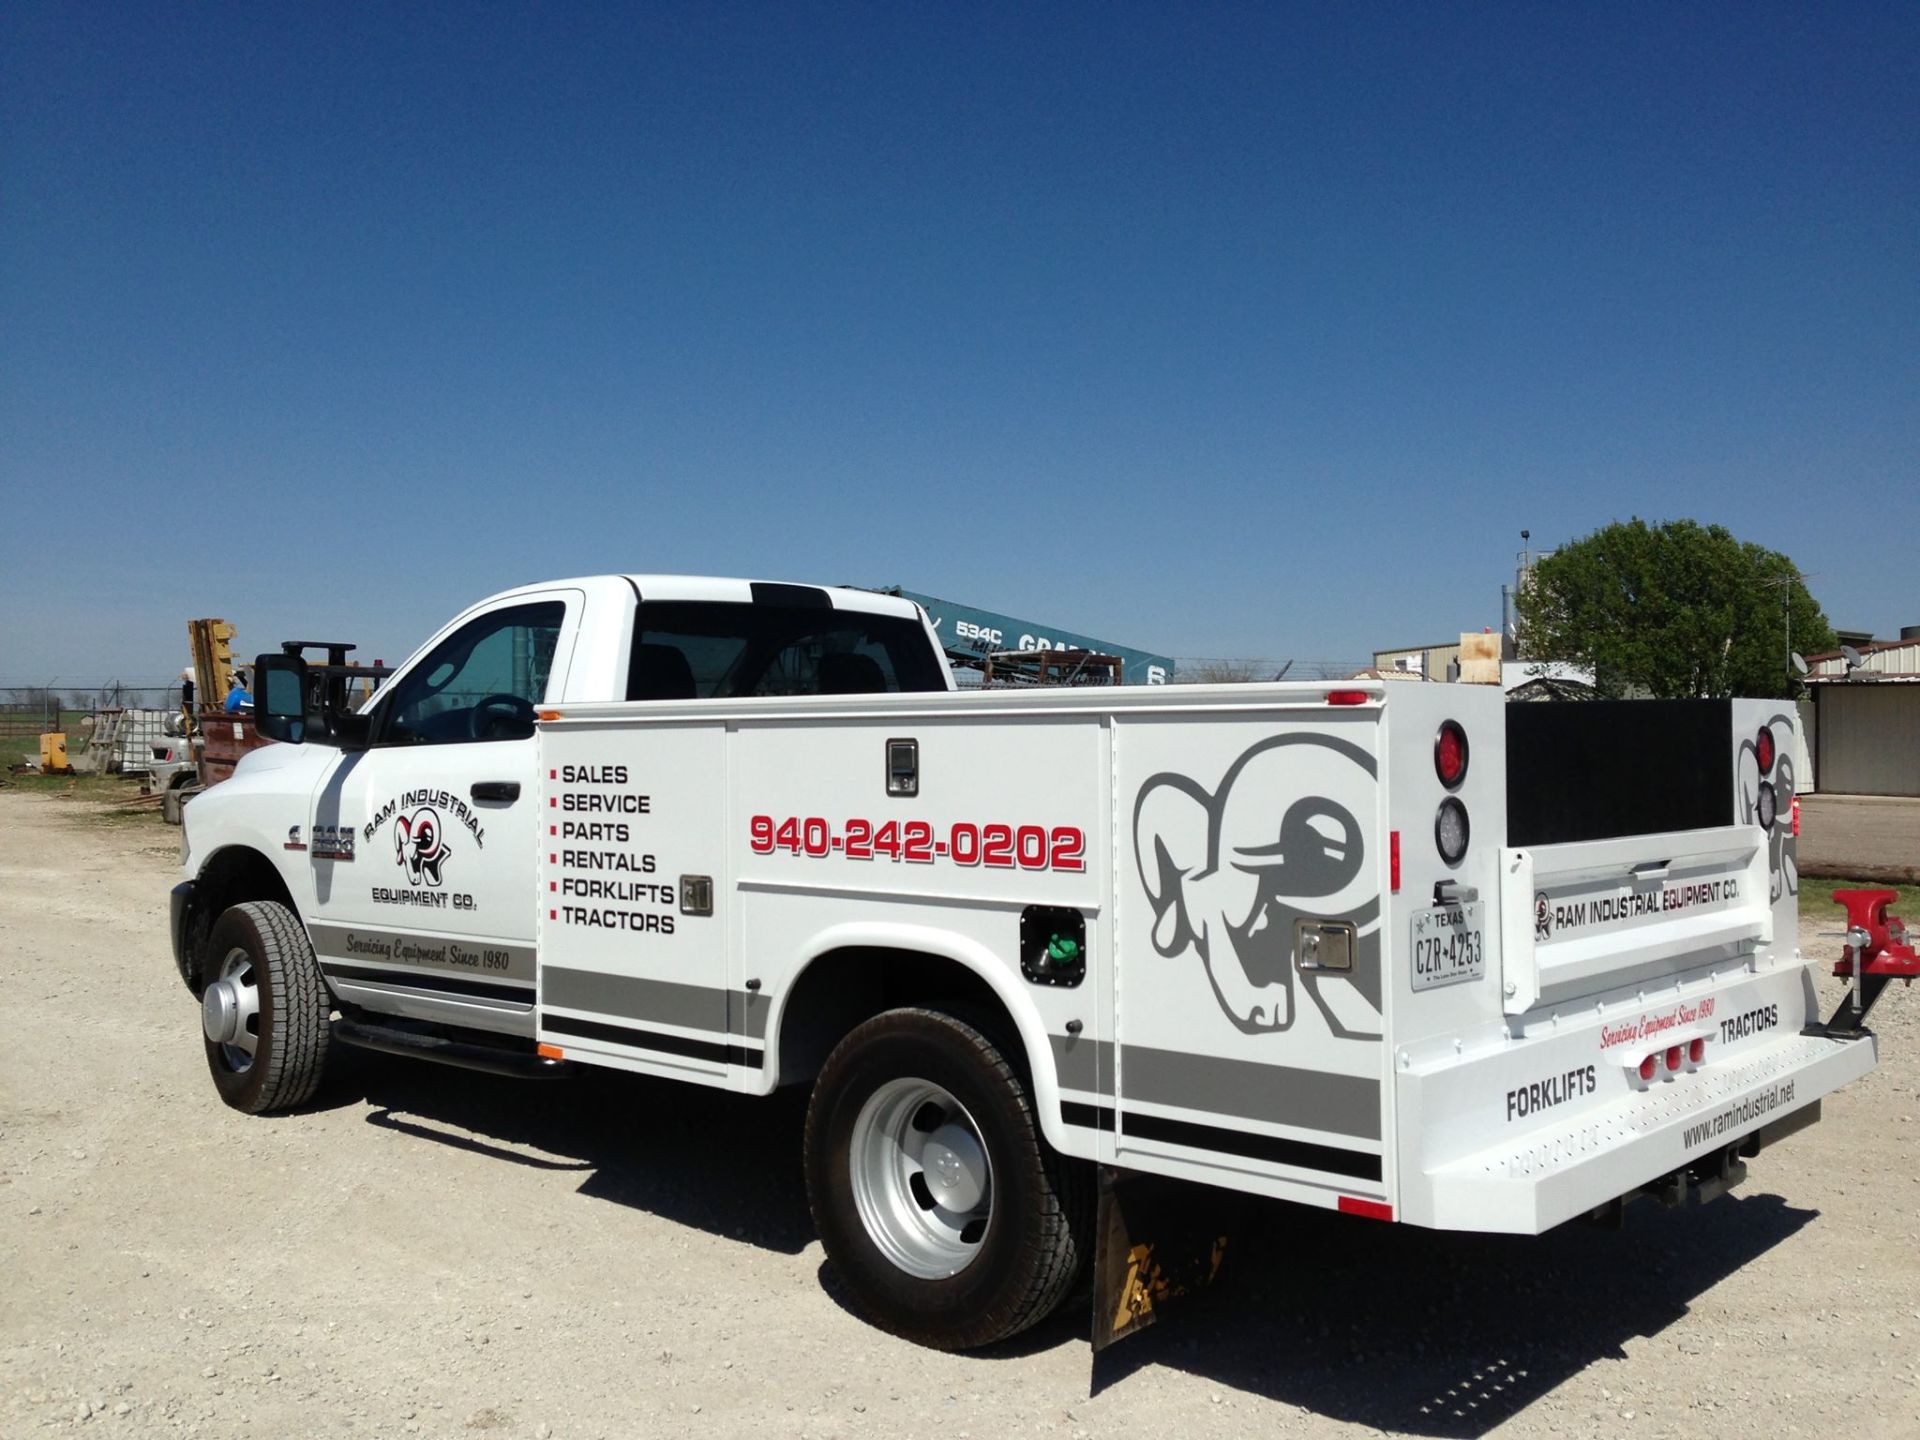 Employees — Servicing Equipment in Fort Worth, TX